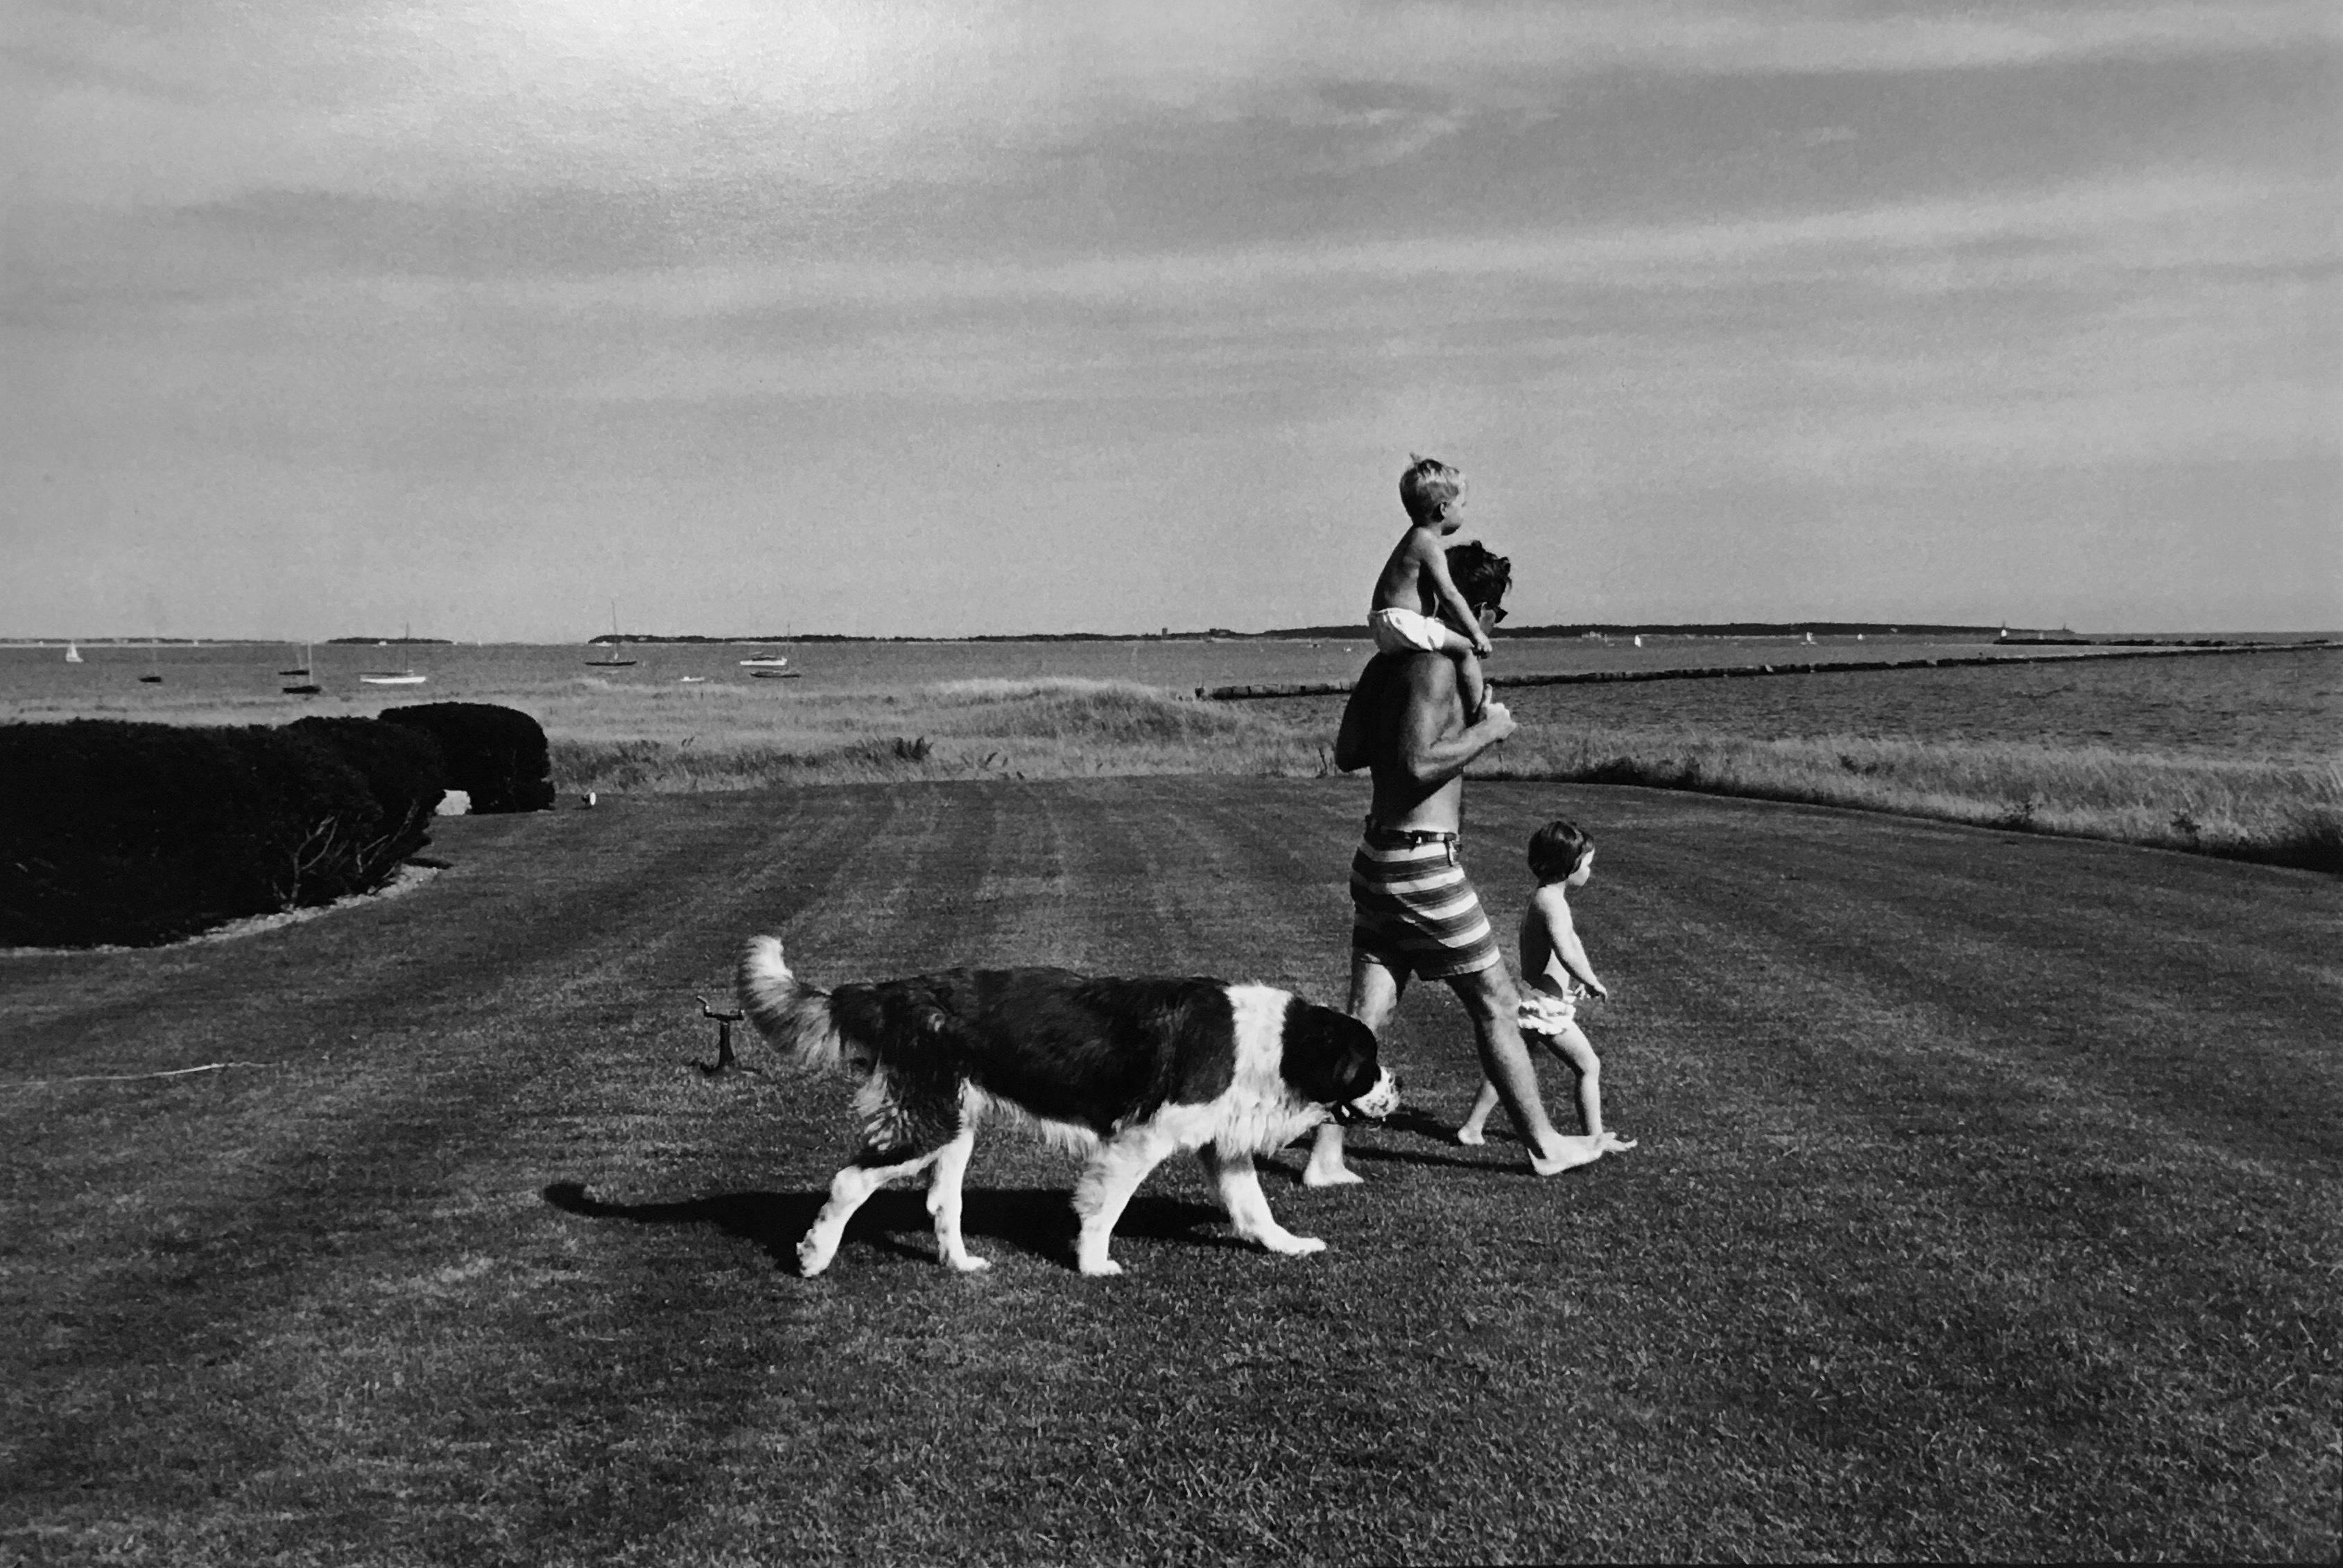 Jacques Lowe Black and White Photograph - Hyannis Port Summer, Bobby, Michael, Courtney and dog Brumus